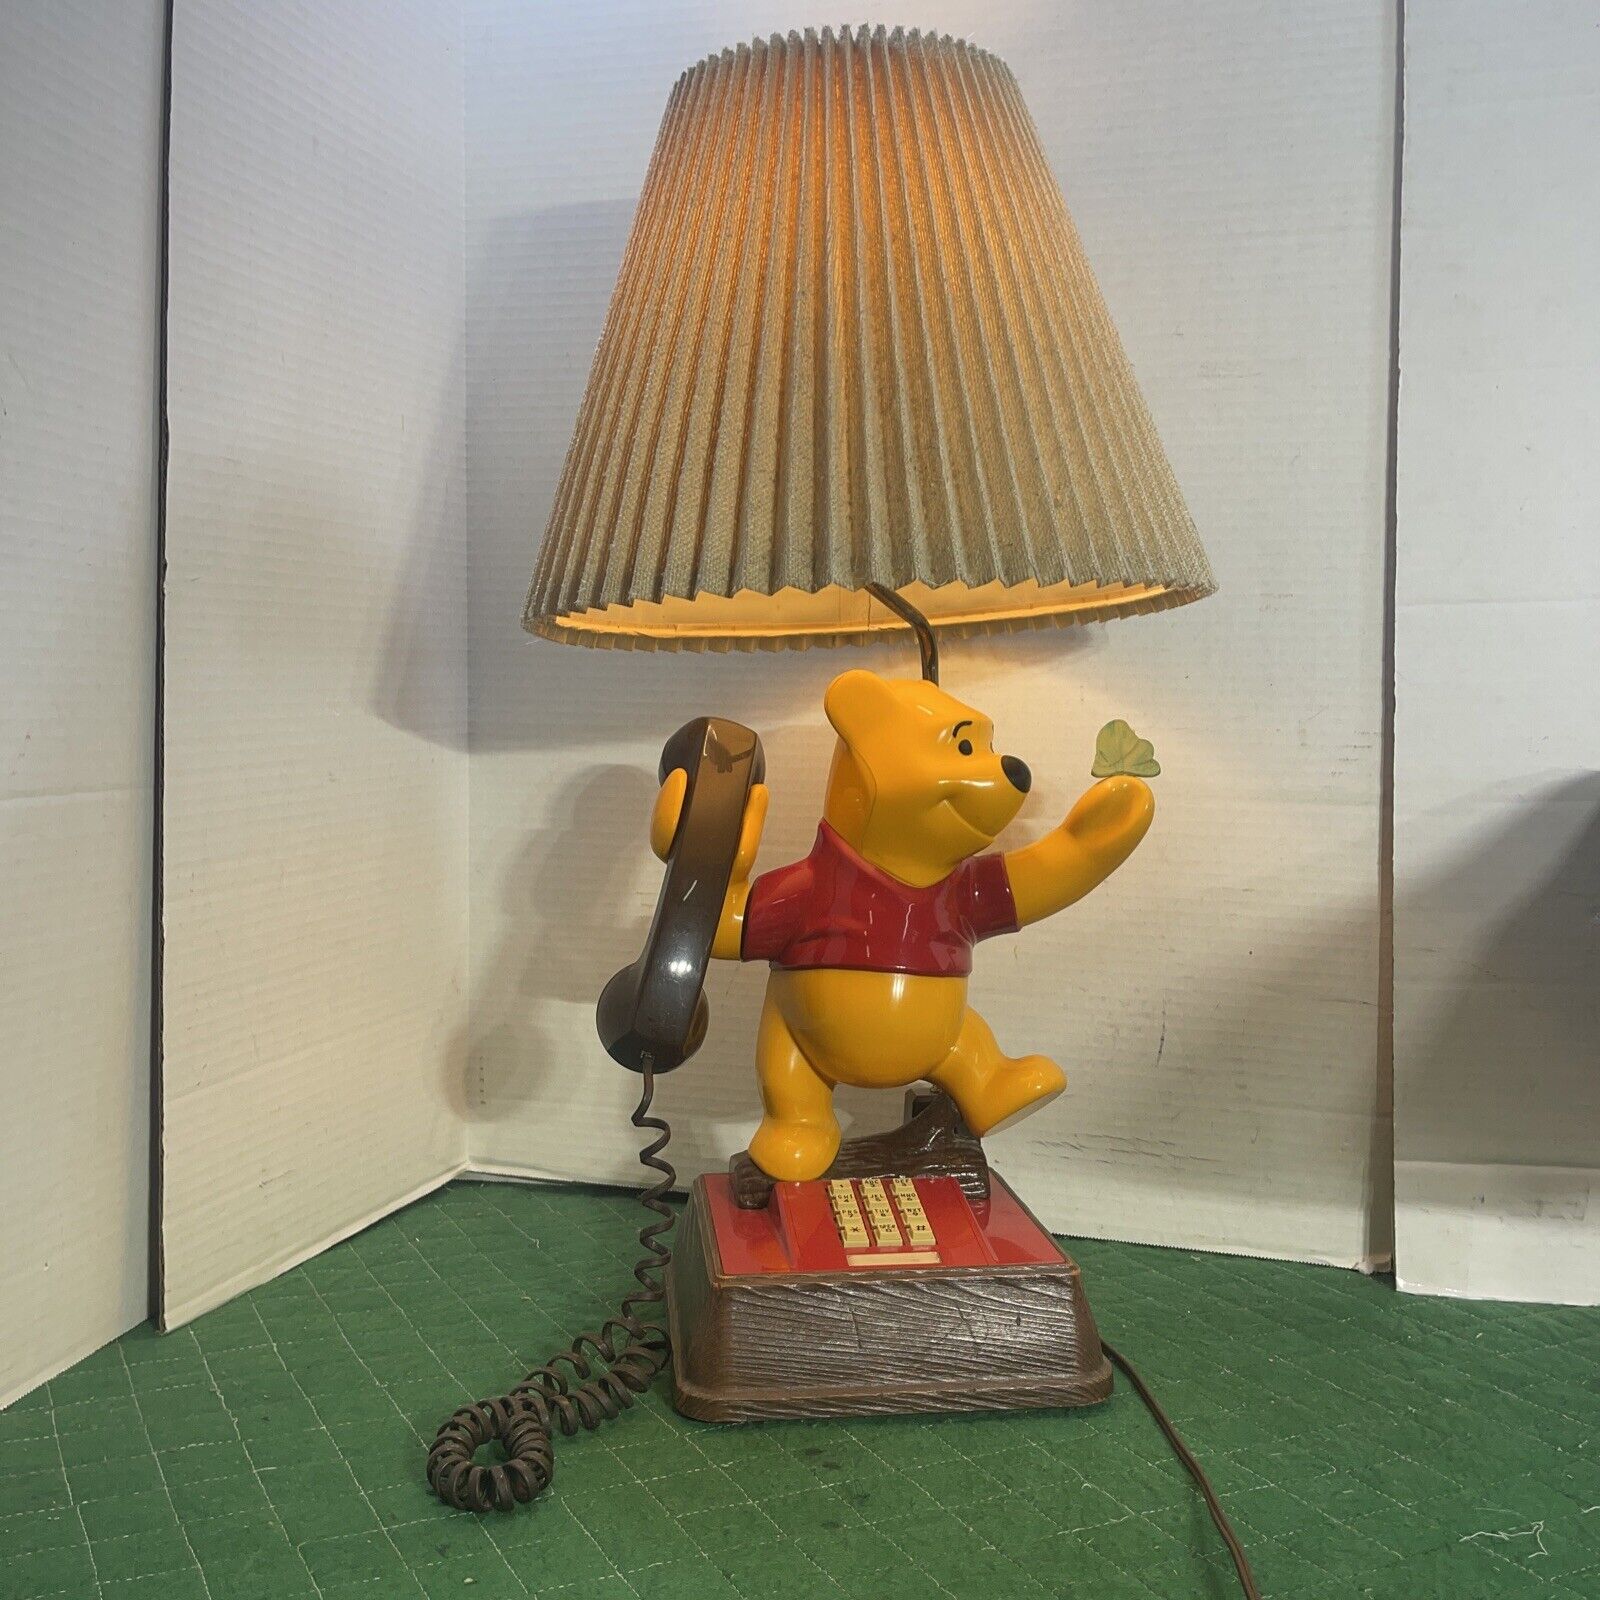 Adorable RaRe Vintage 1964 Disney Winnie the Pooh Lamp Phone With Shade 